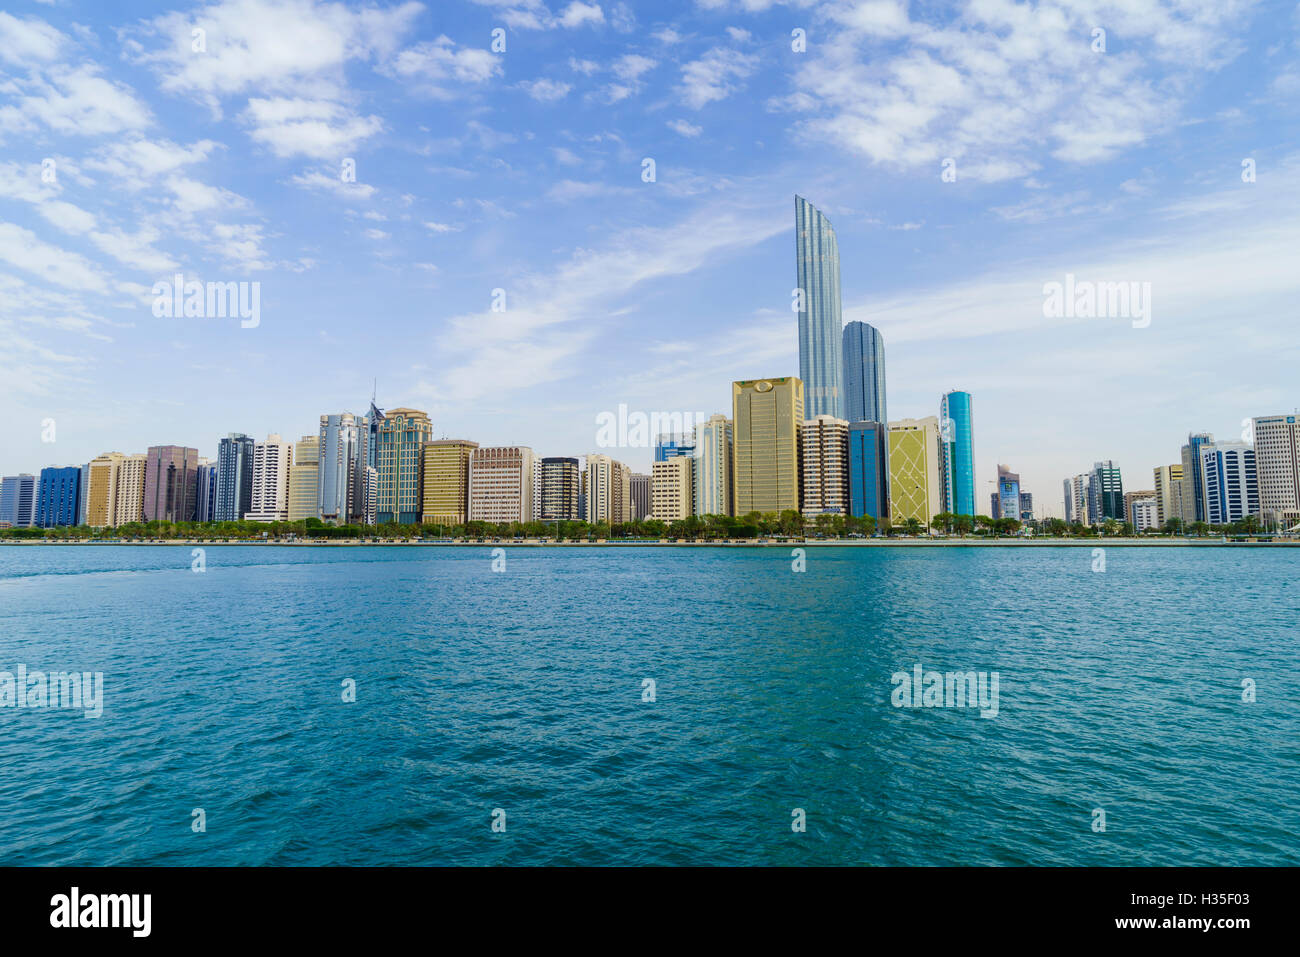 Skyscrapers in the Al Markaziyah district and Corniche viewed from the Gulf, Abu Dhabi, United Arab Emirates, Middle East Stock Photo